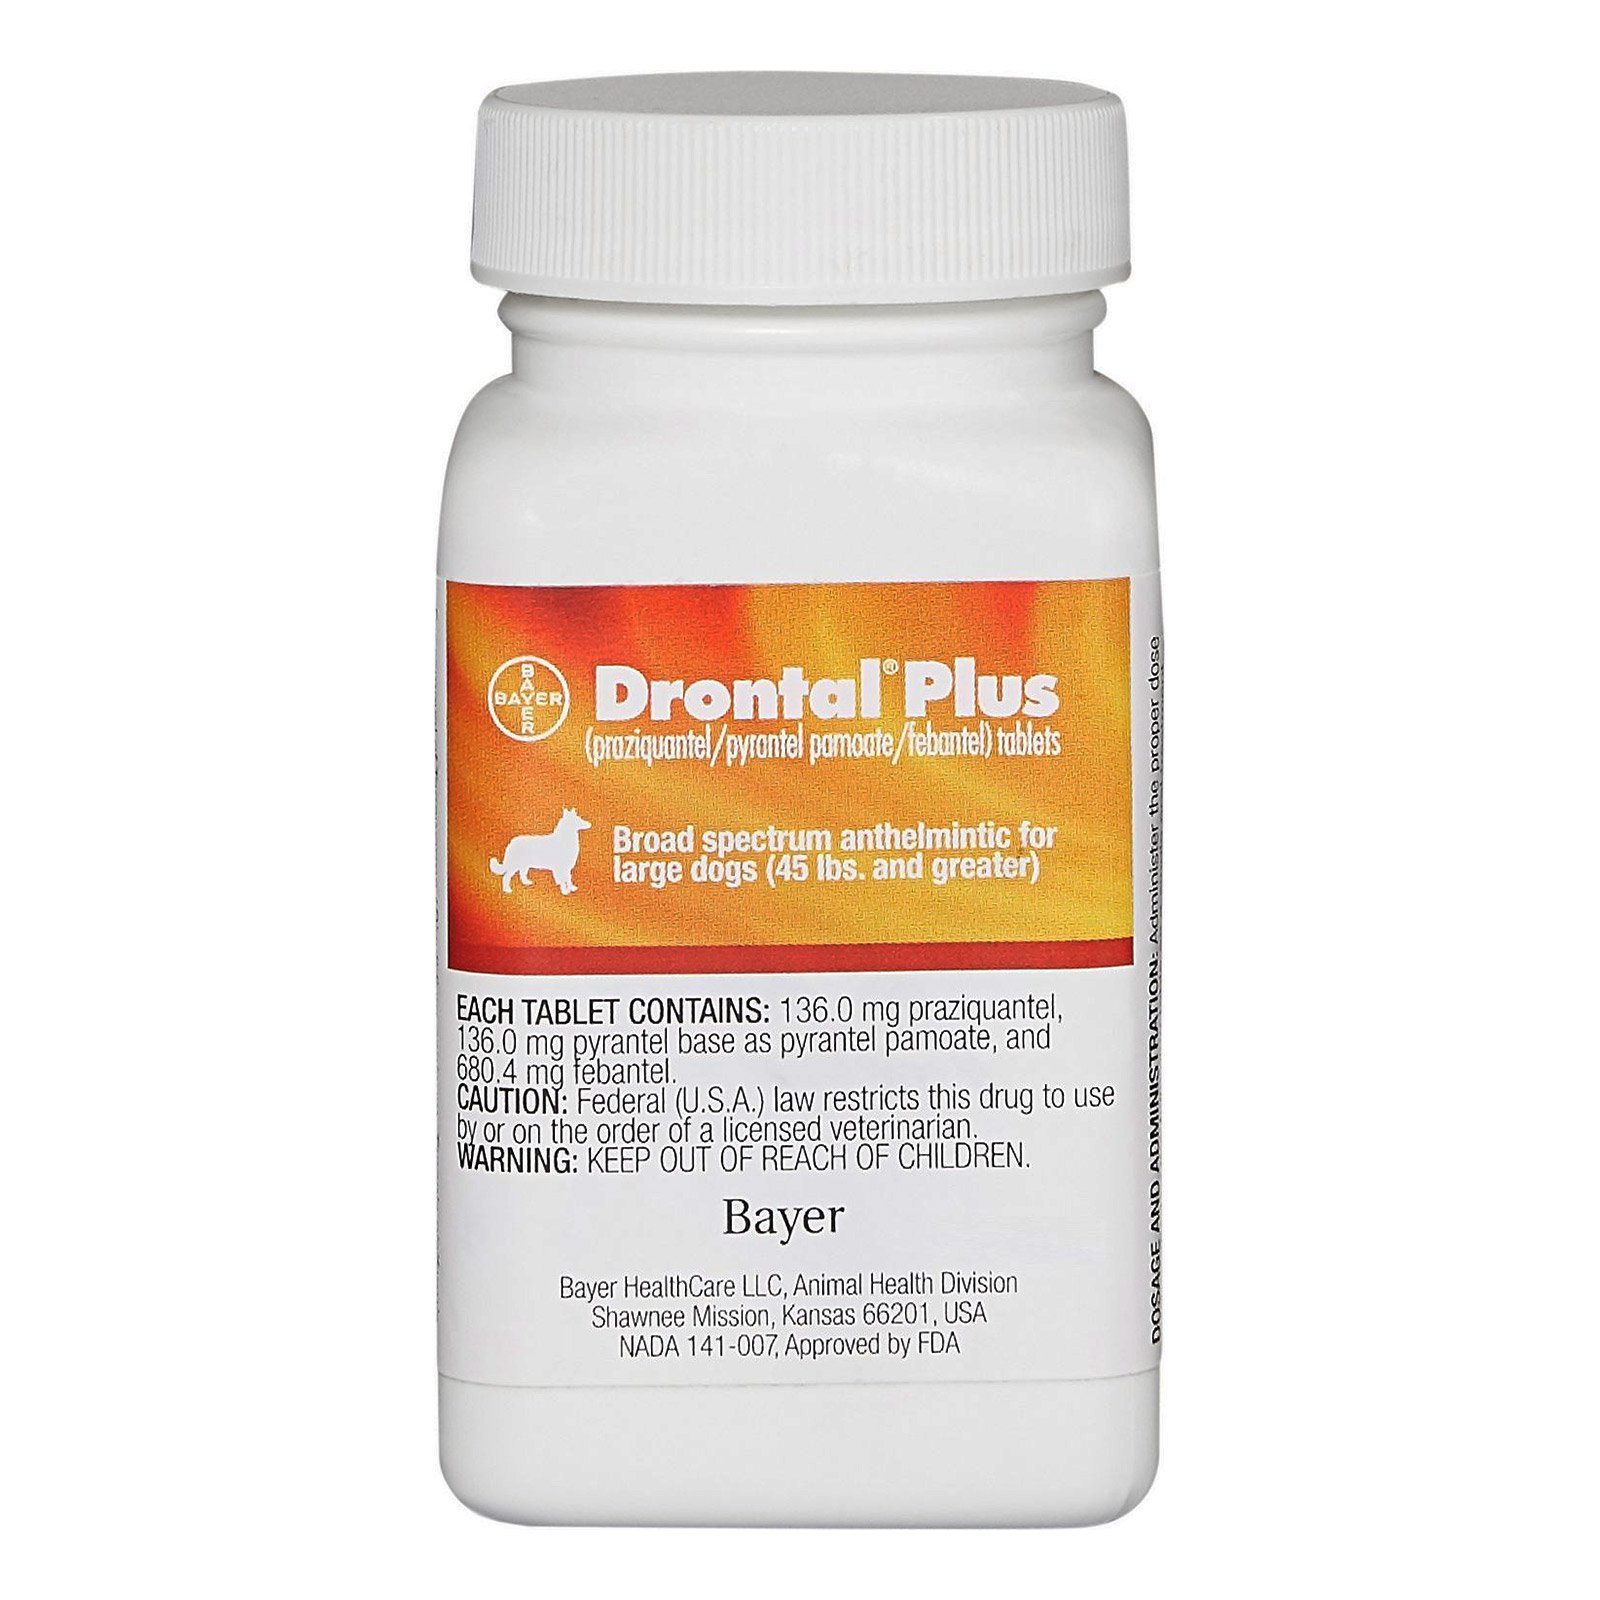 drontal-plus-for-dogs-flavor (1).jpg